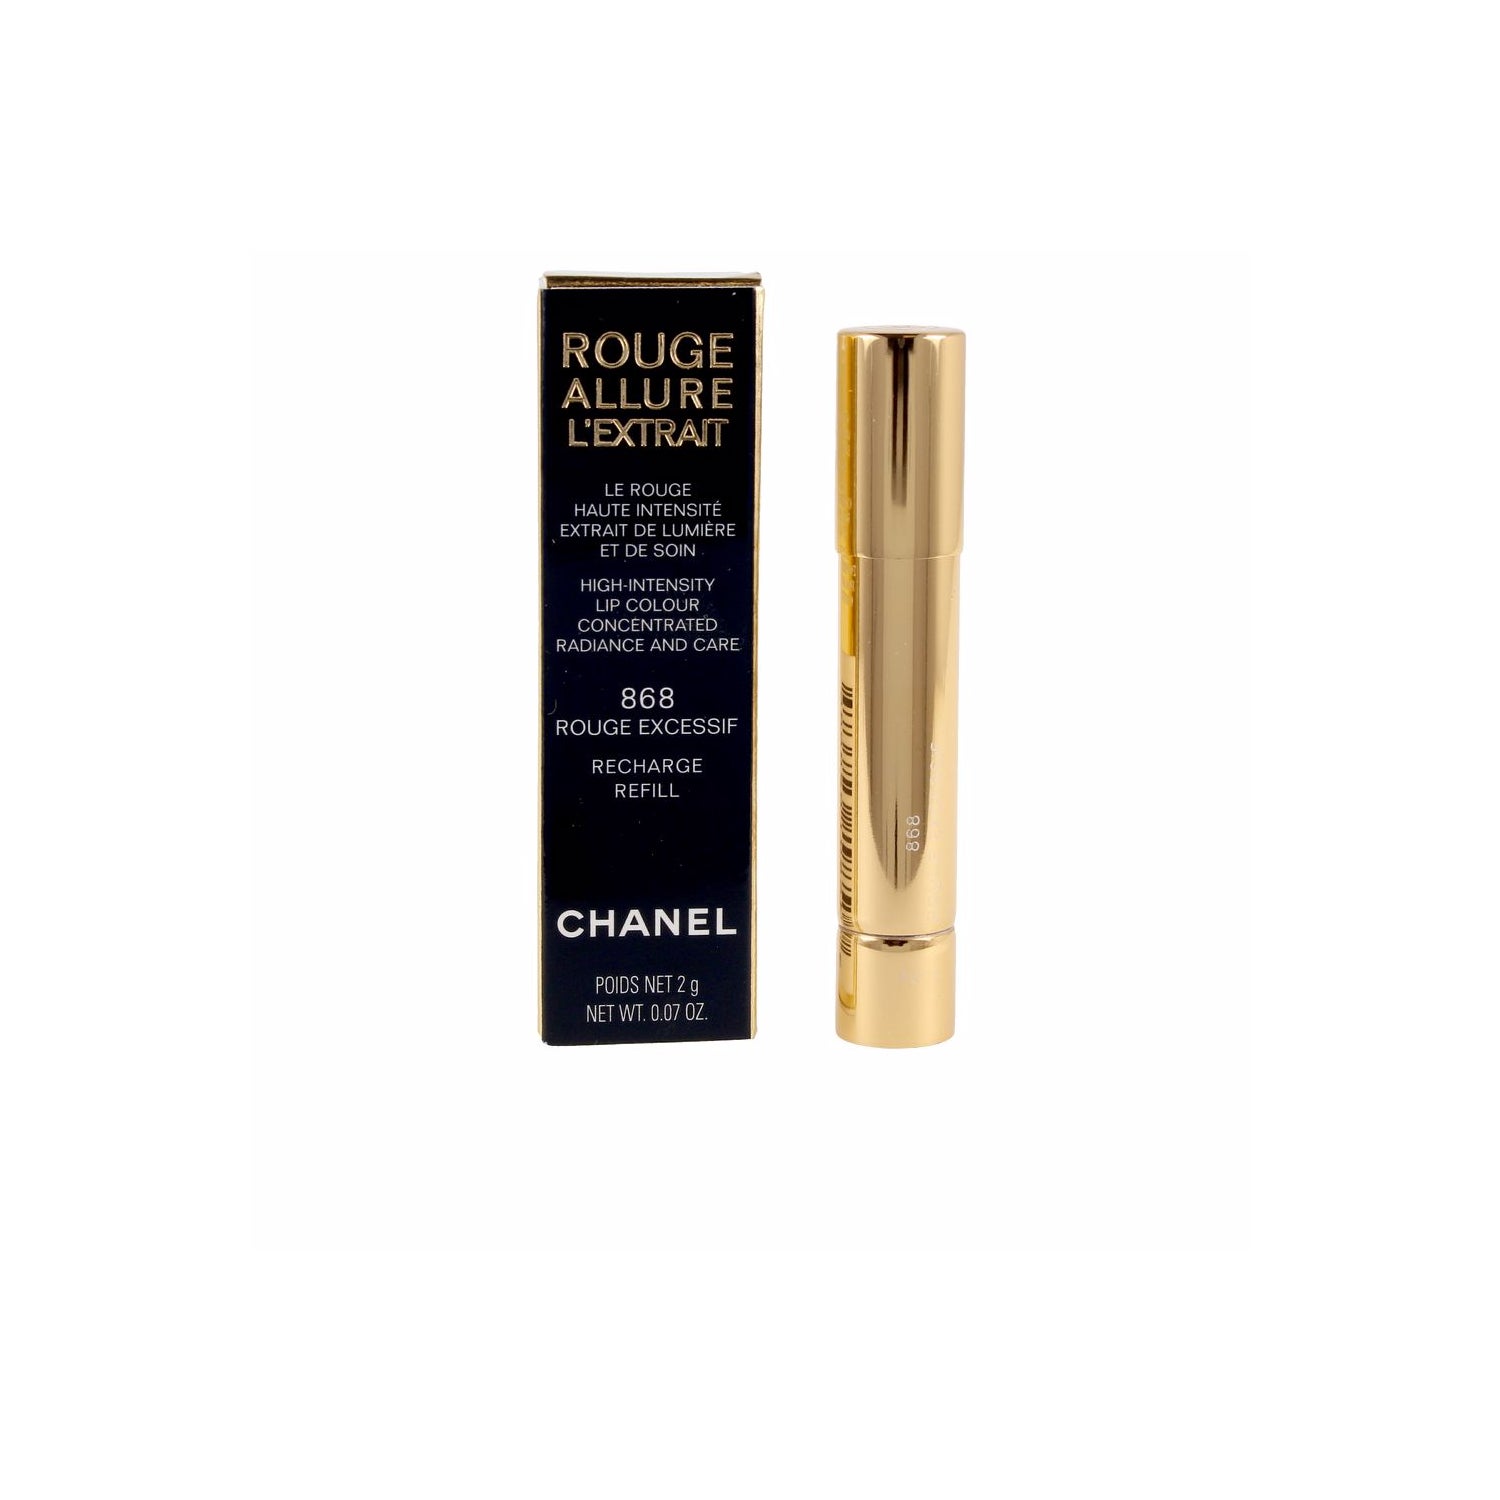 ROUGE ALLURE L'EXTRAIT - REFILL High-Intensity Lip Colour Concentrated  Radiance and Care - CHANEL